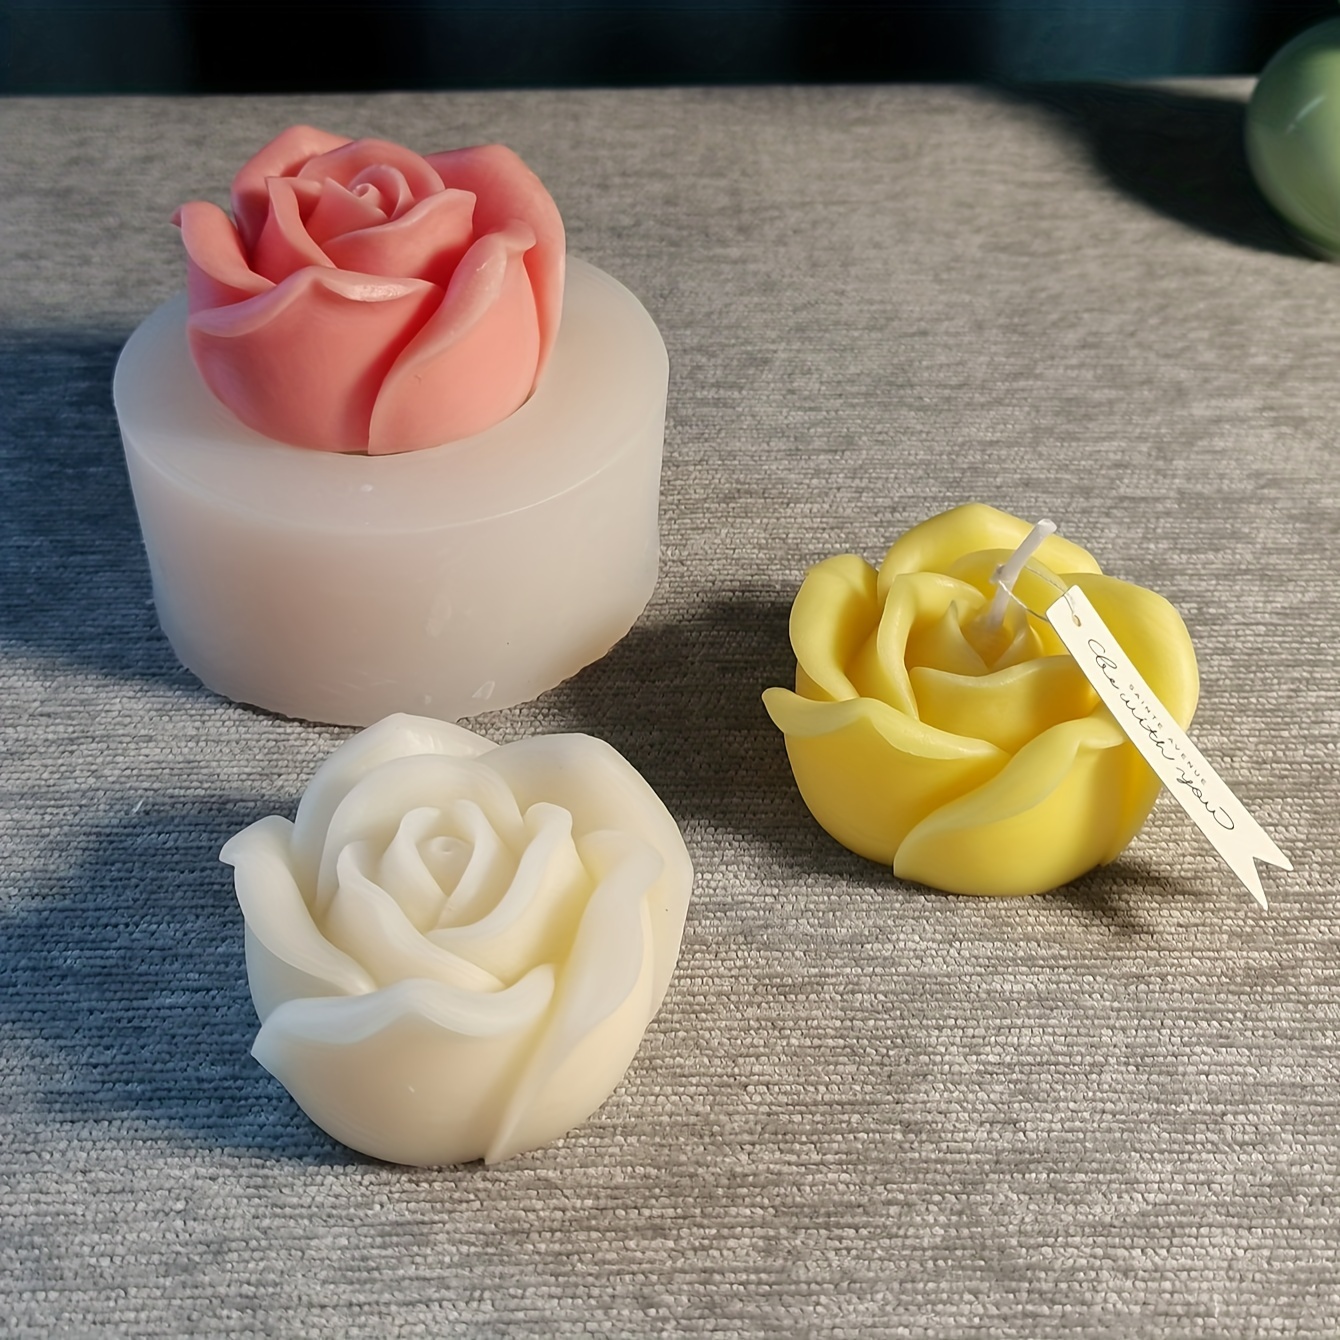 1pc DIY Rose Candle Mold